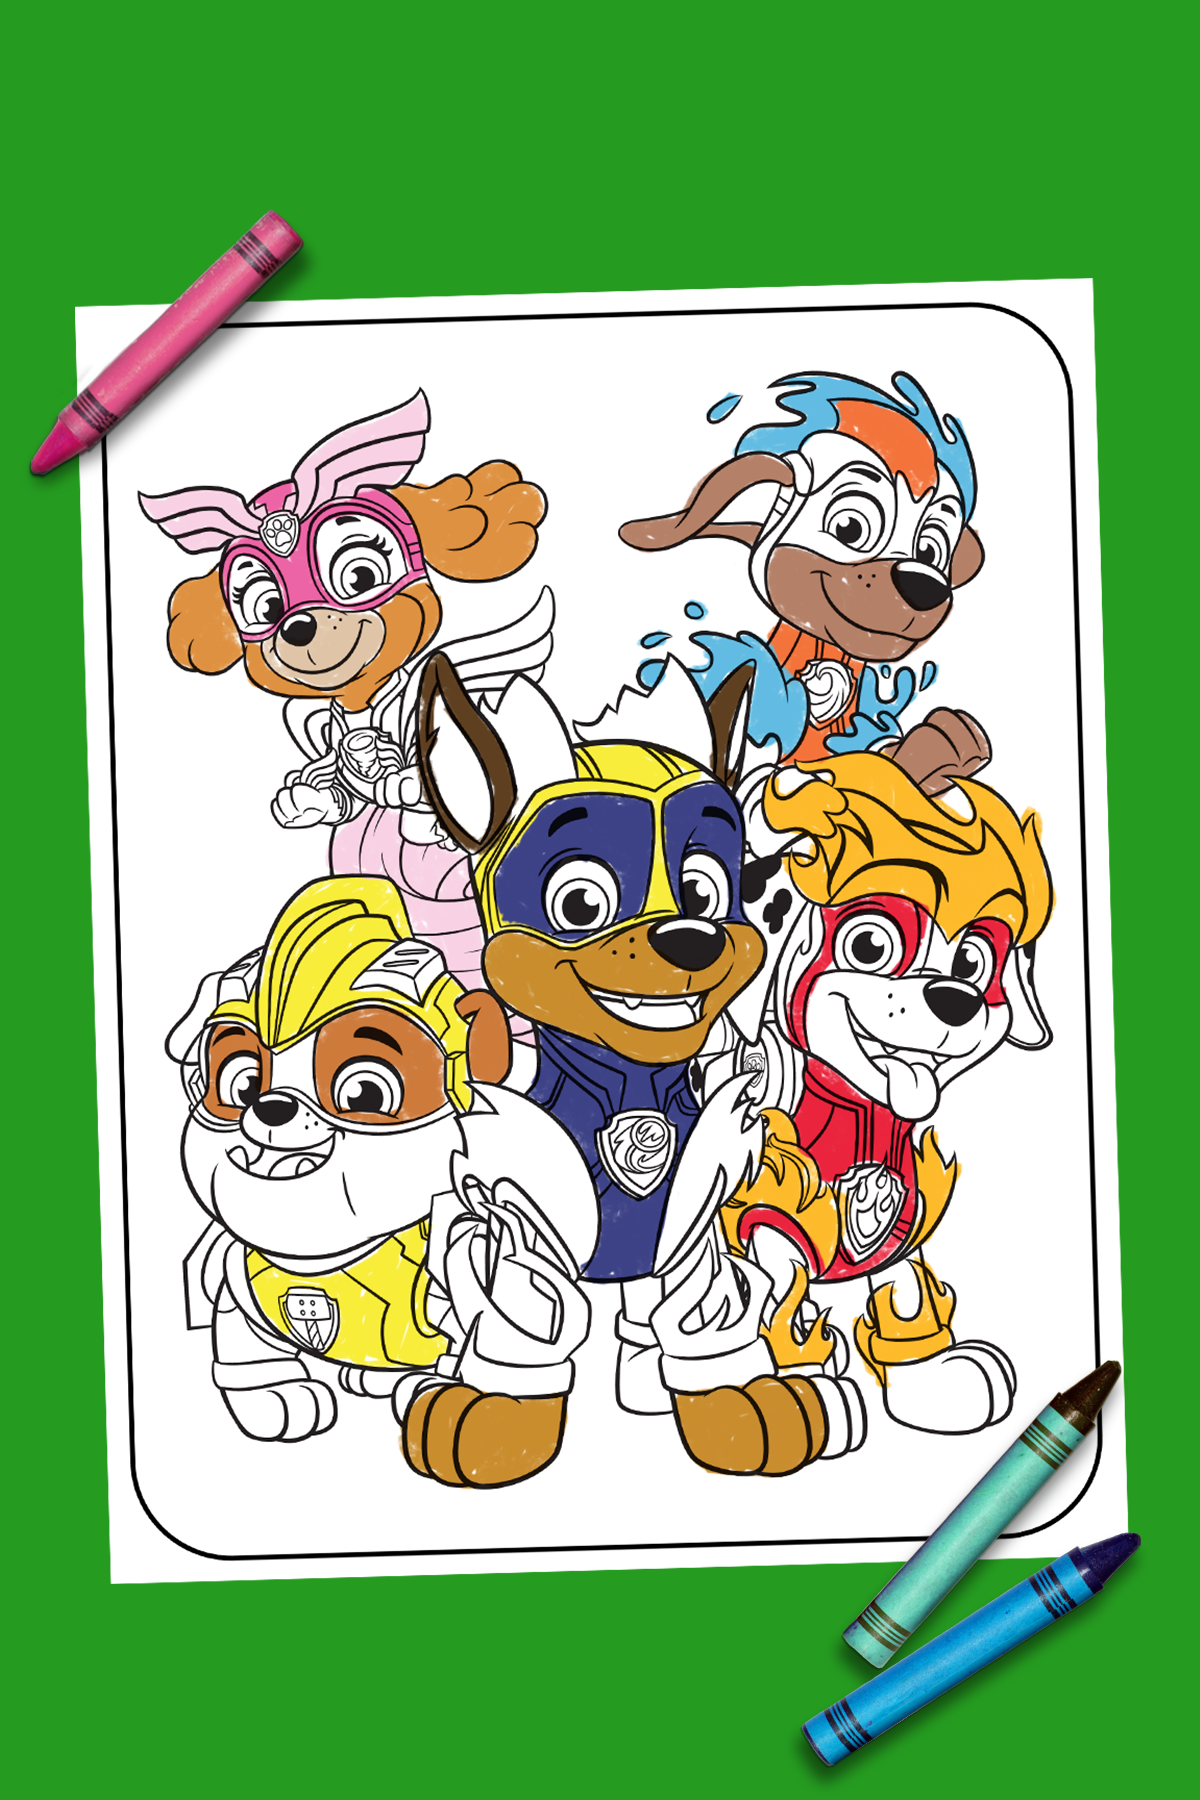 PAW Patrol Mighty Pups Coloring Page Nickelodeon Parents